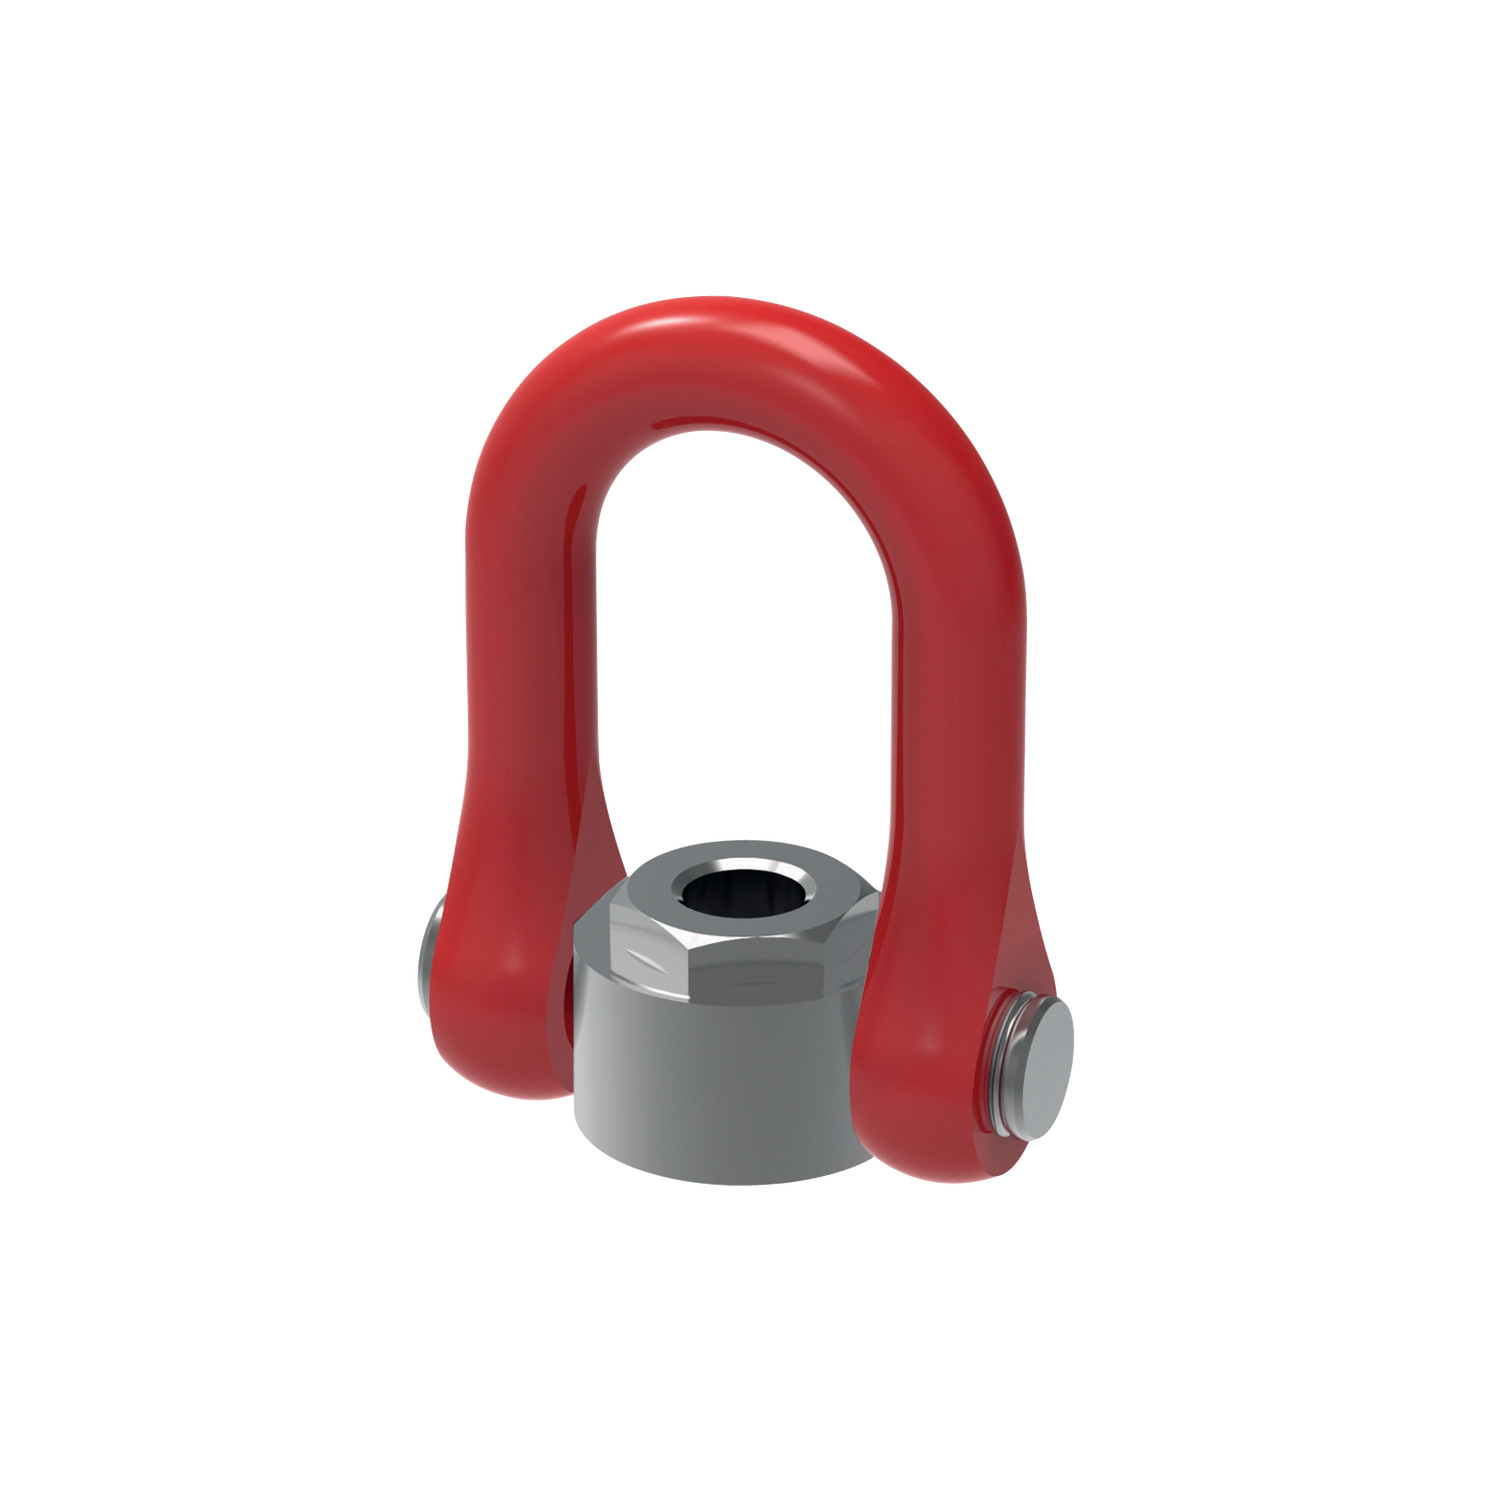 https://www.automotioncomponents.co.uk/media/products/large/double-swivel-shackle-nuts-p4010-r.jpg